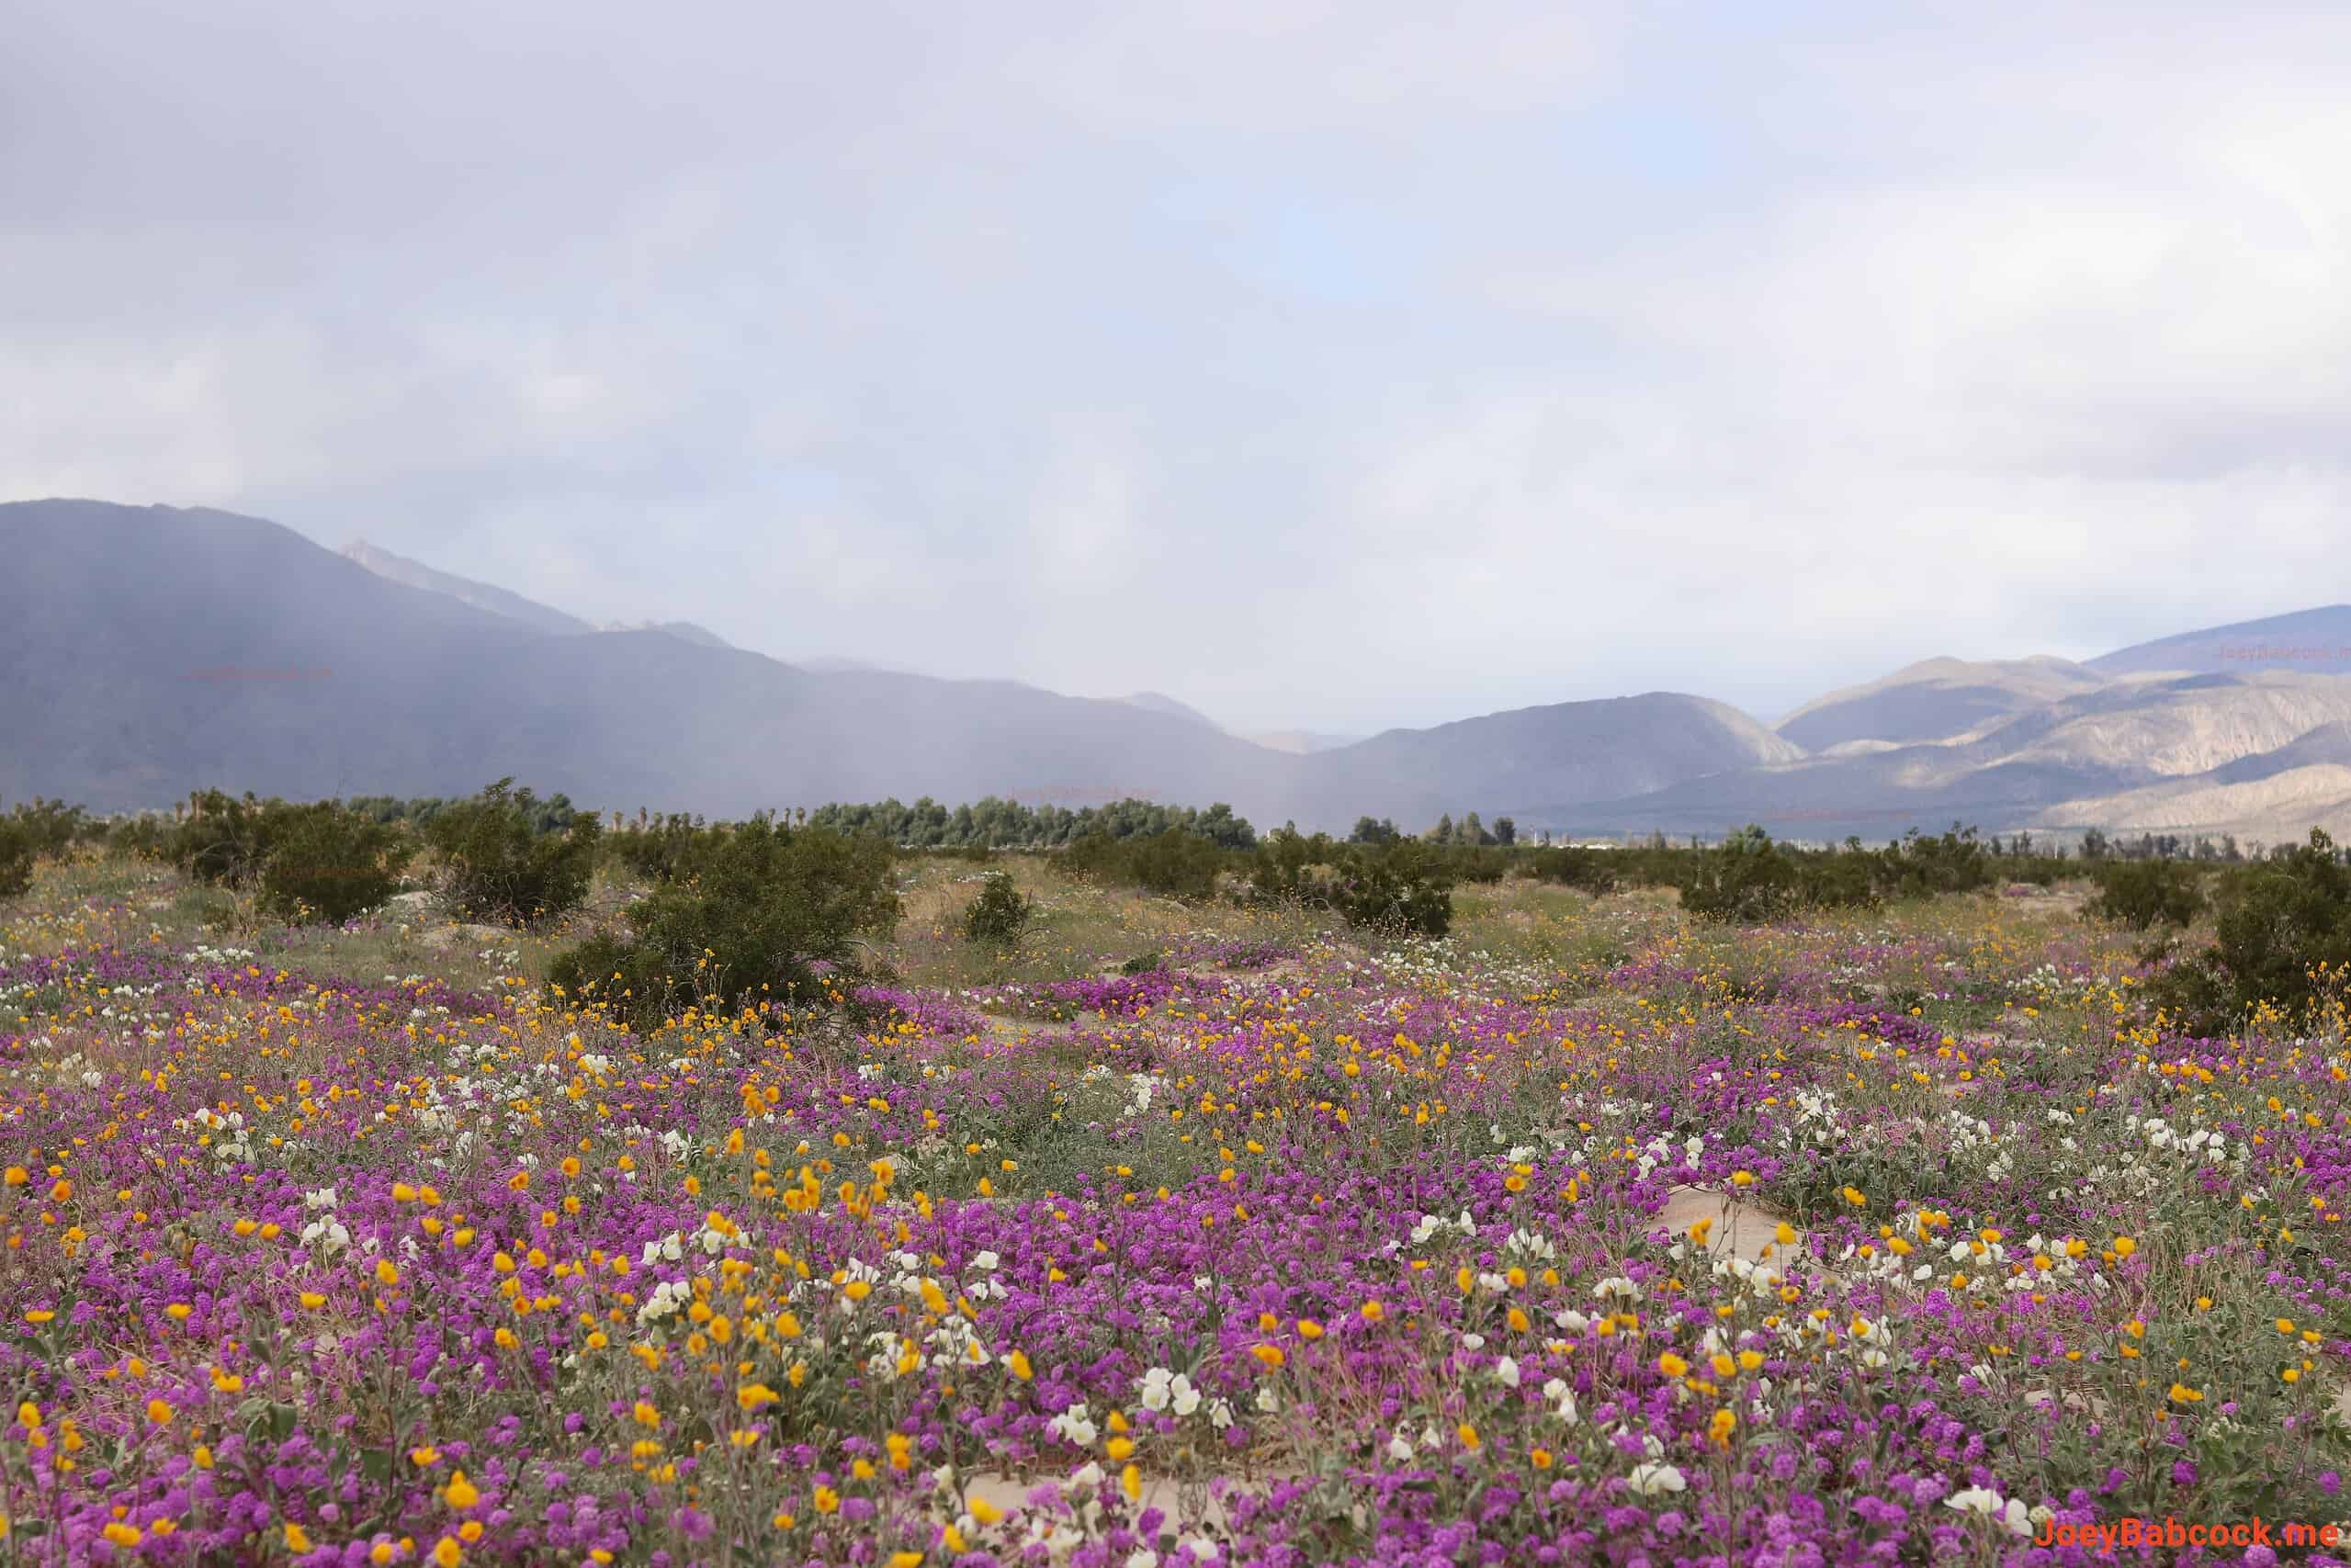 A vibrant carpet of wildflowers stretches towards the mist-shrouded mountains of Borrego Springs. (c) Joey Babcock March, 2024 - Borrego Springs, CA